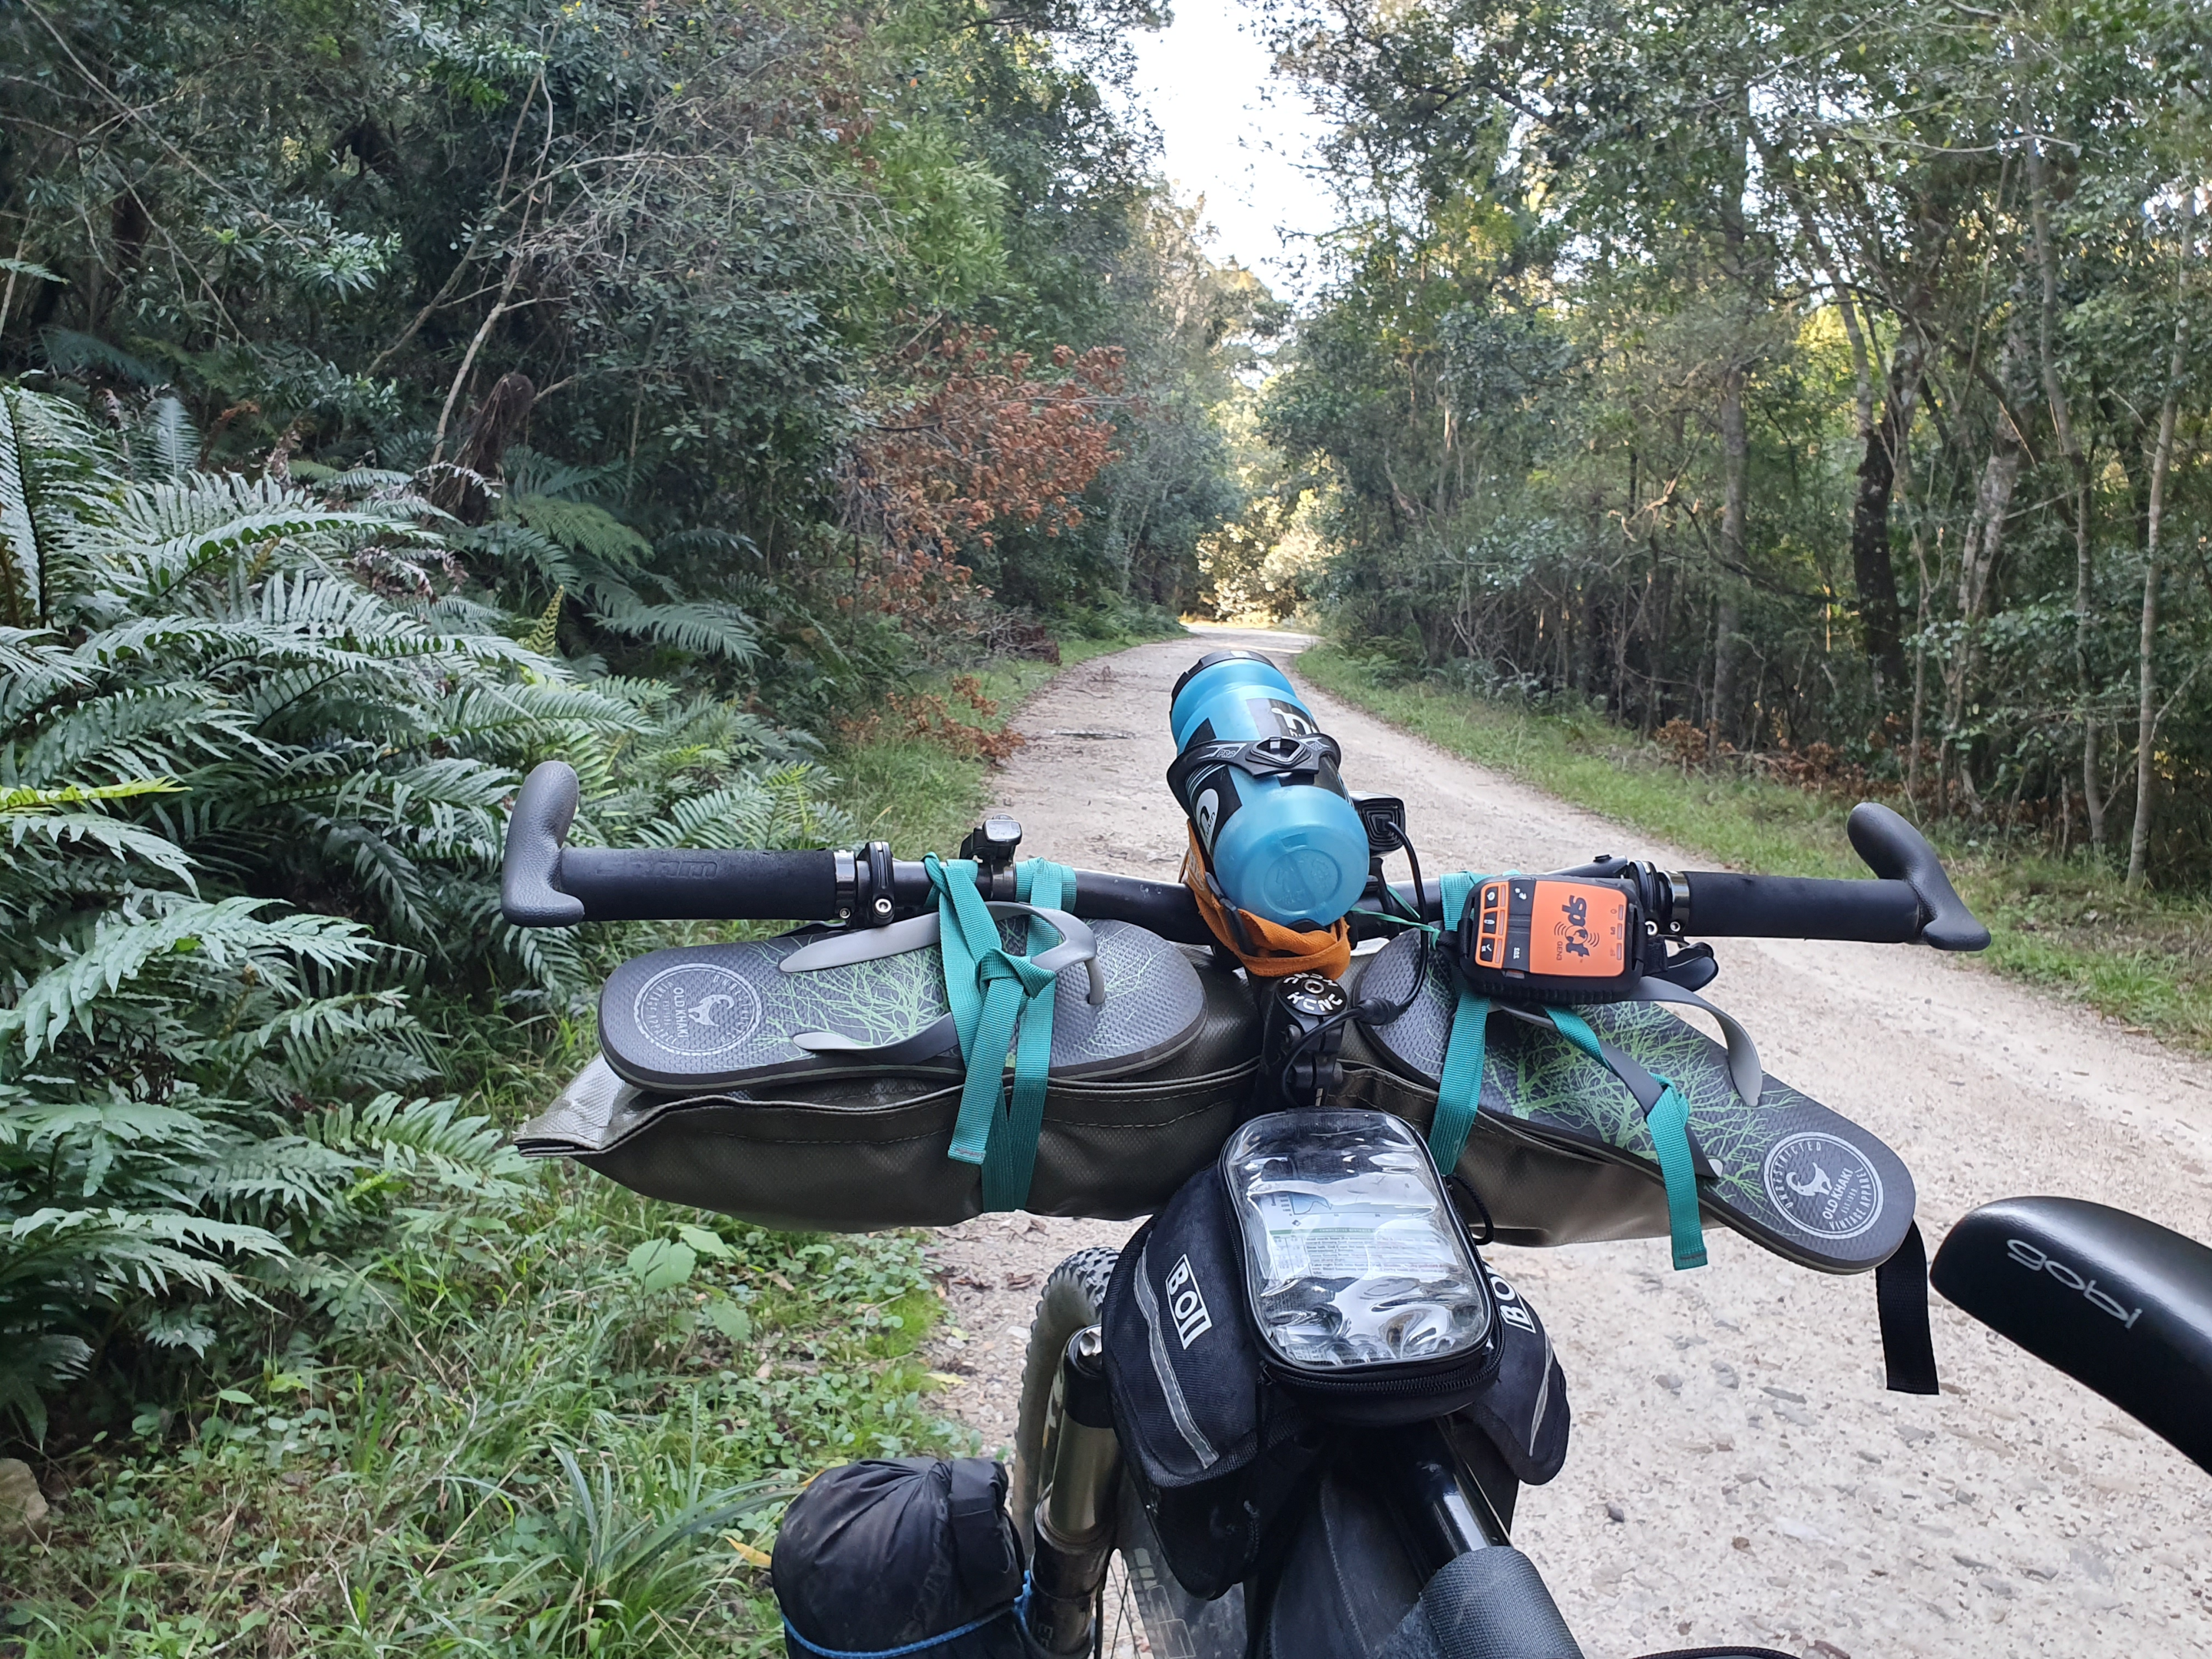 Top Tube  bikepacking frame bag in use with Mobile phone clear bag 